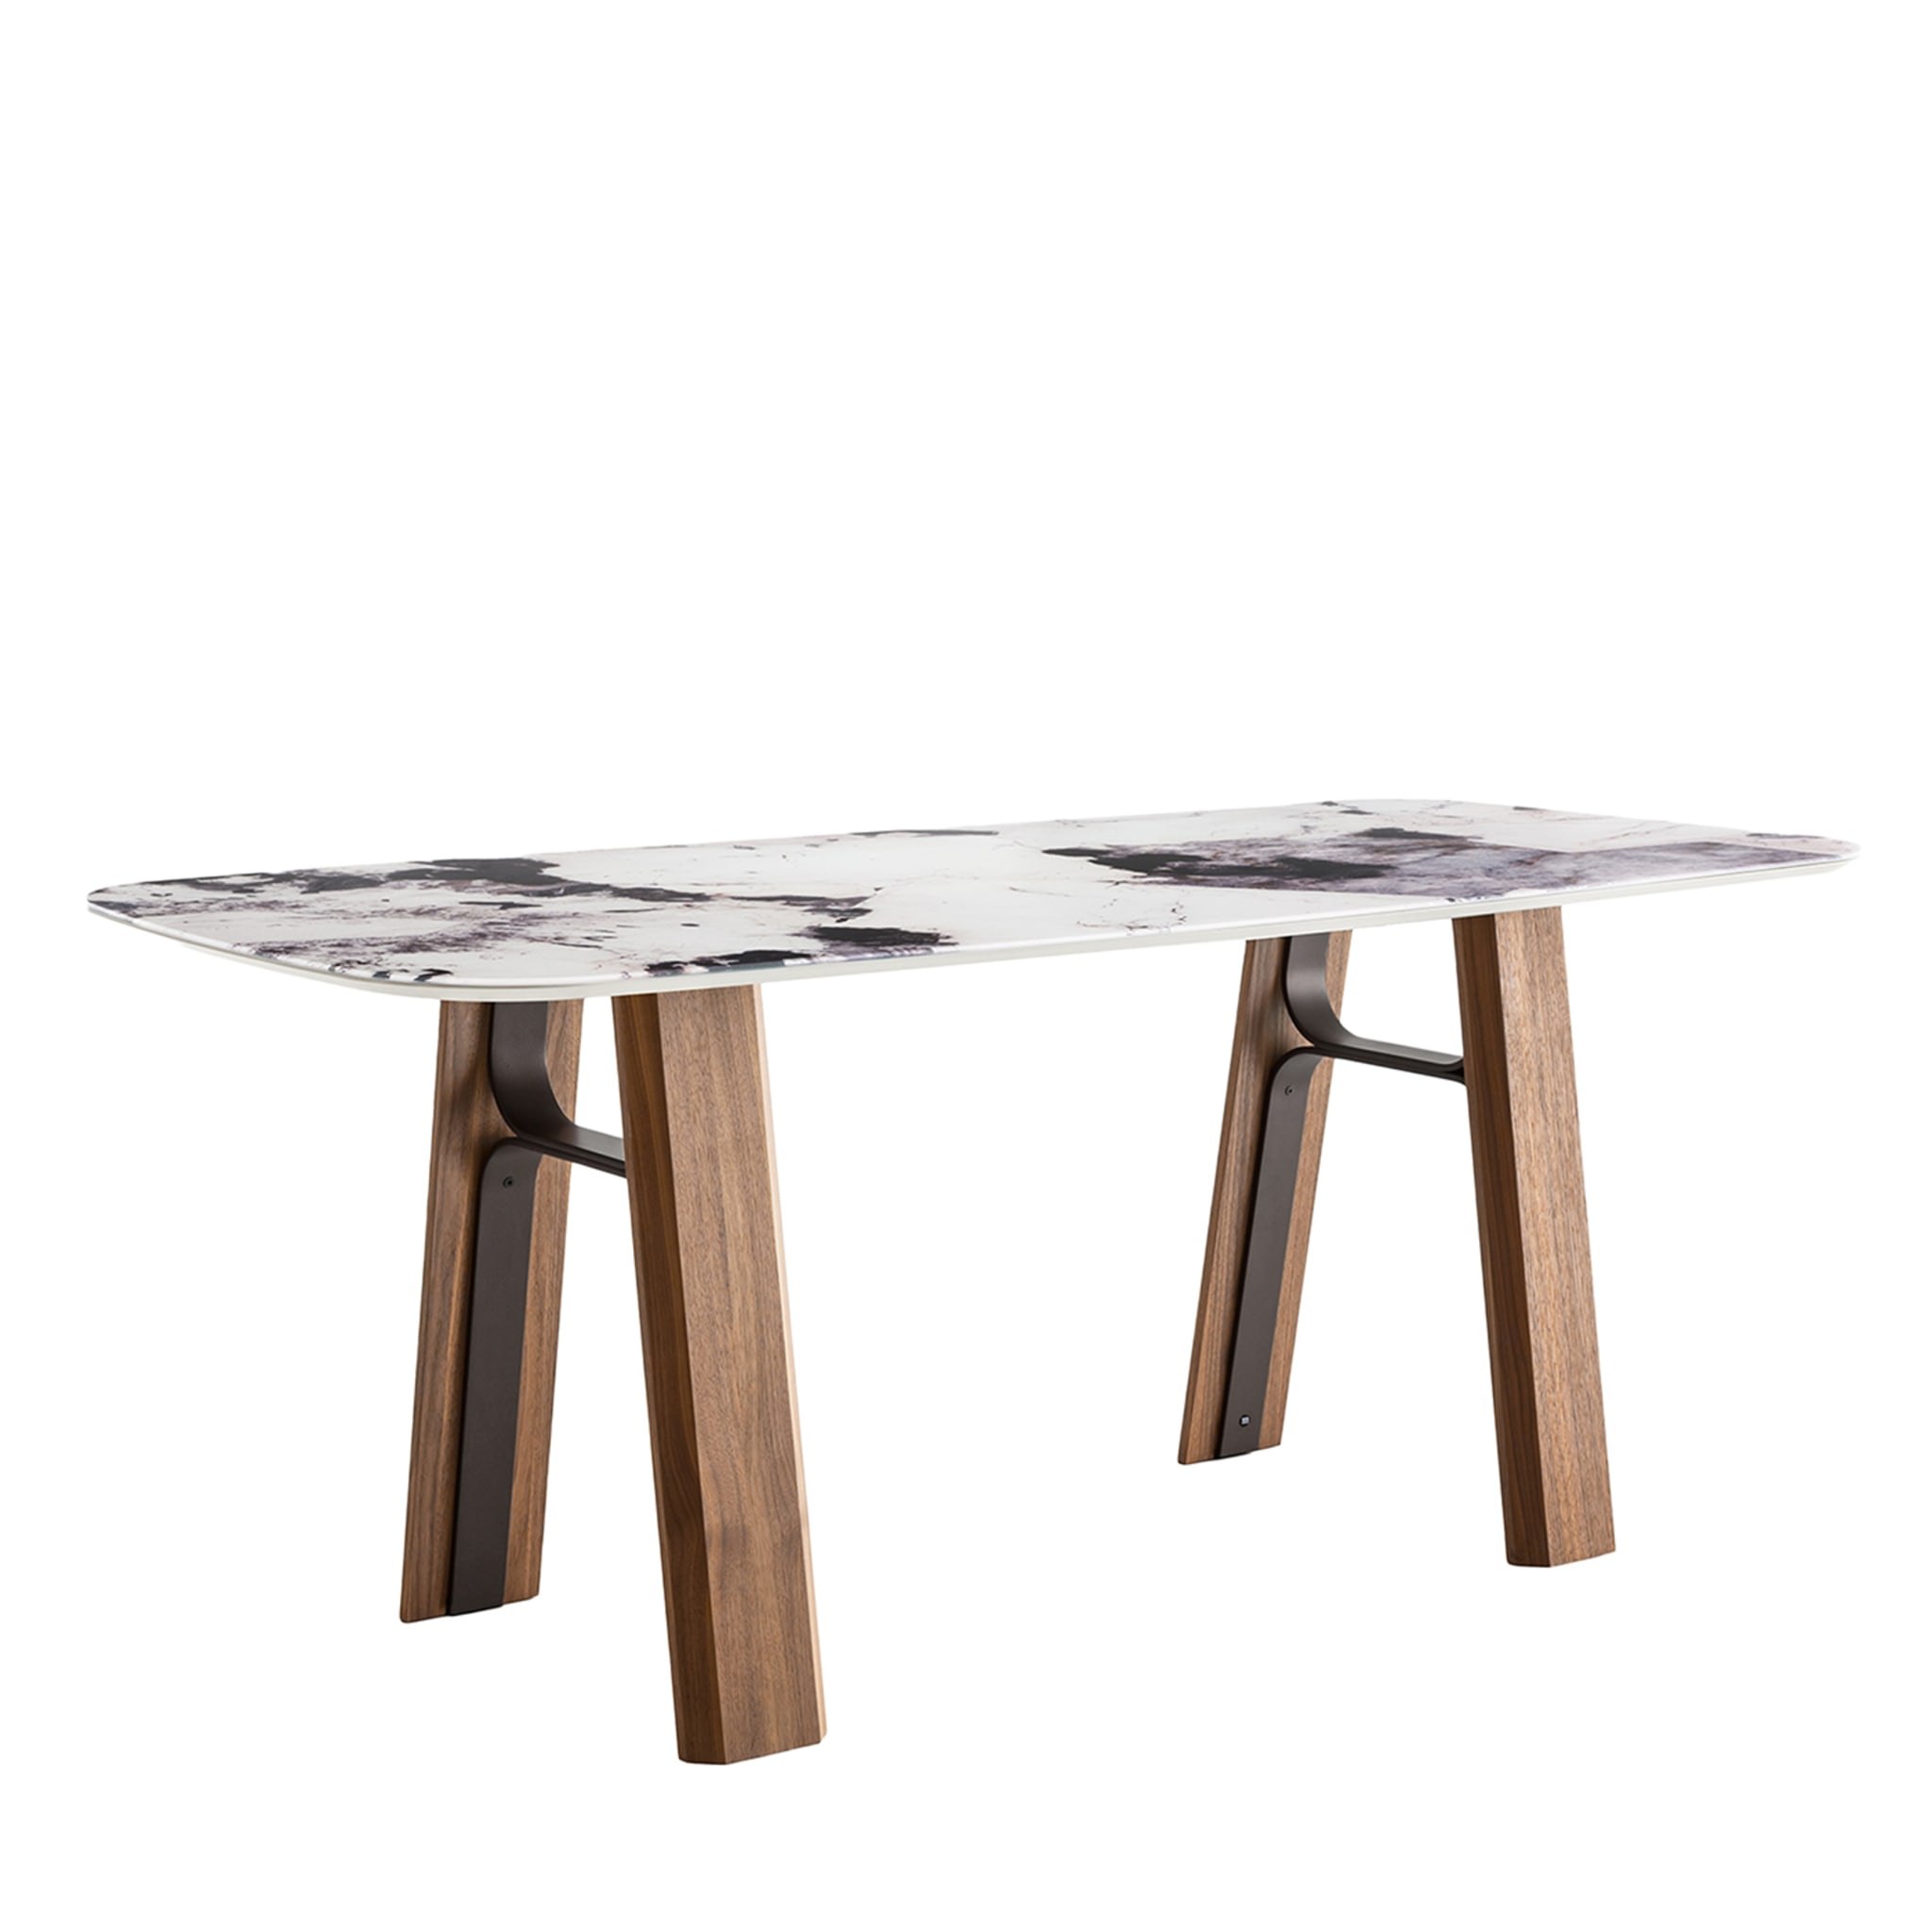 Bridge Patagonia Marble-Effect & Canaletto Walnut Table - Main view